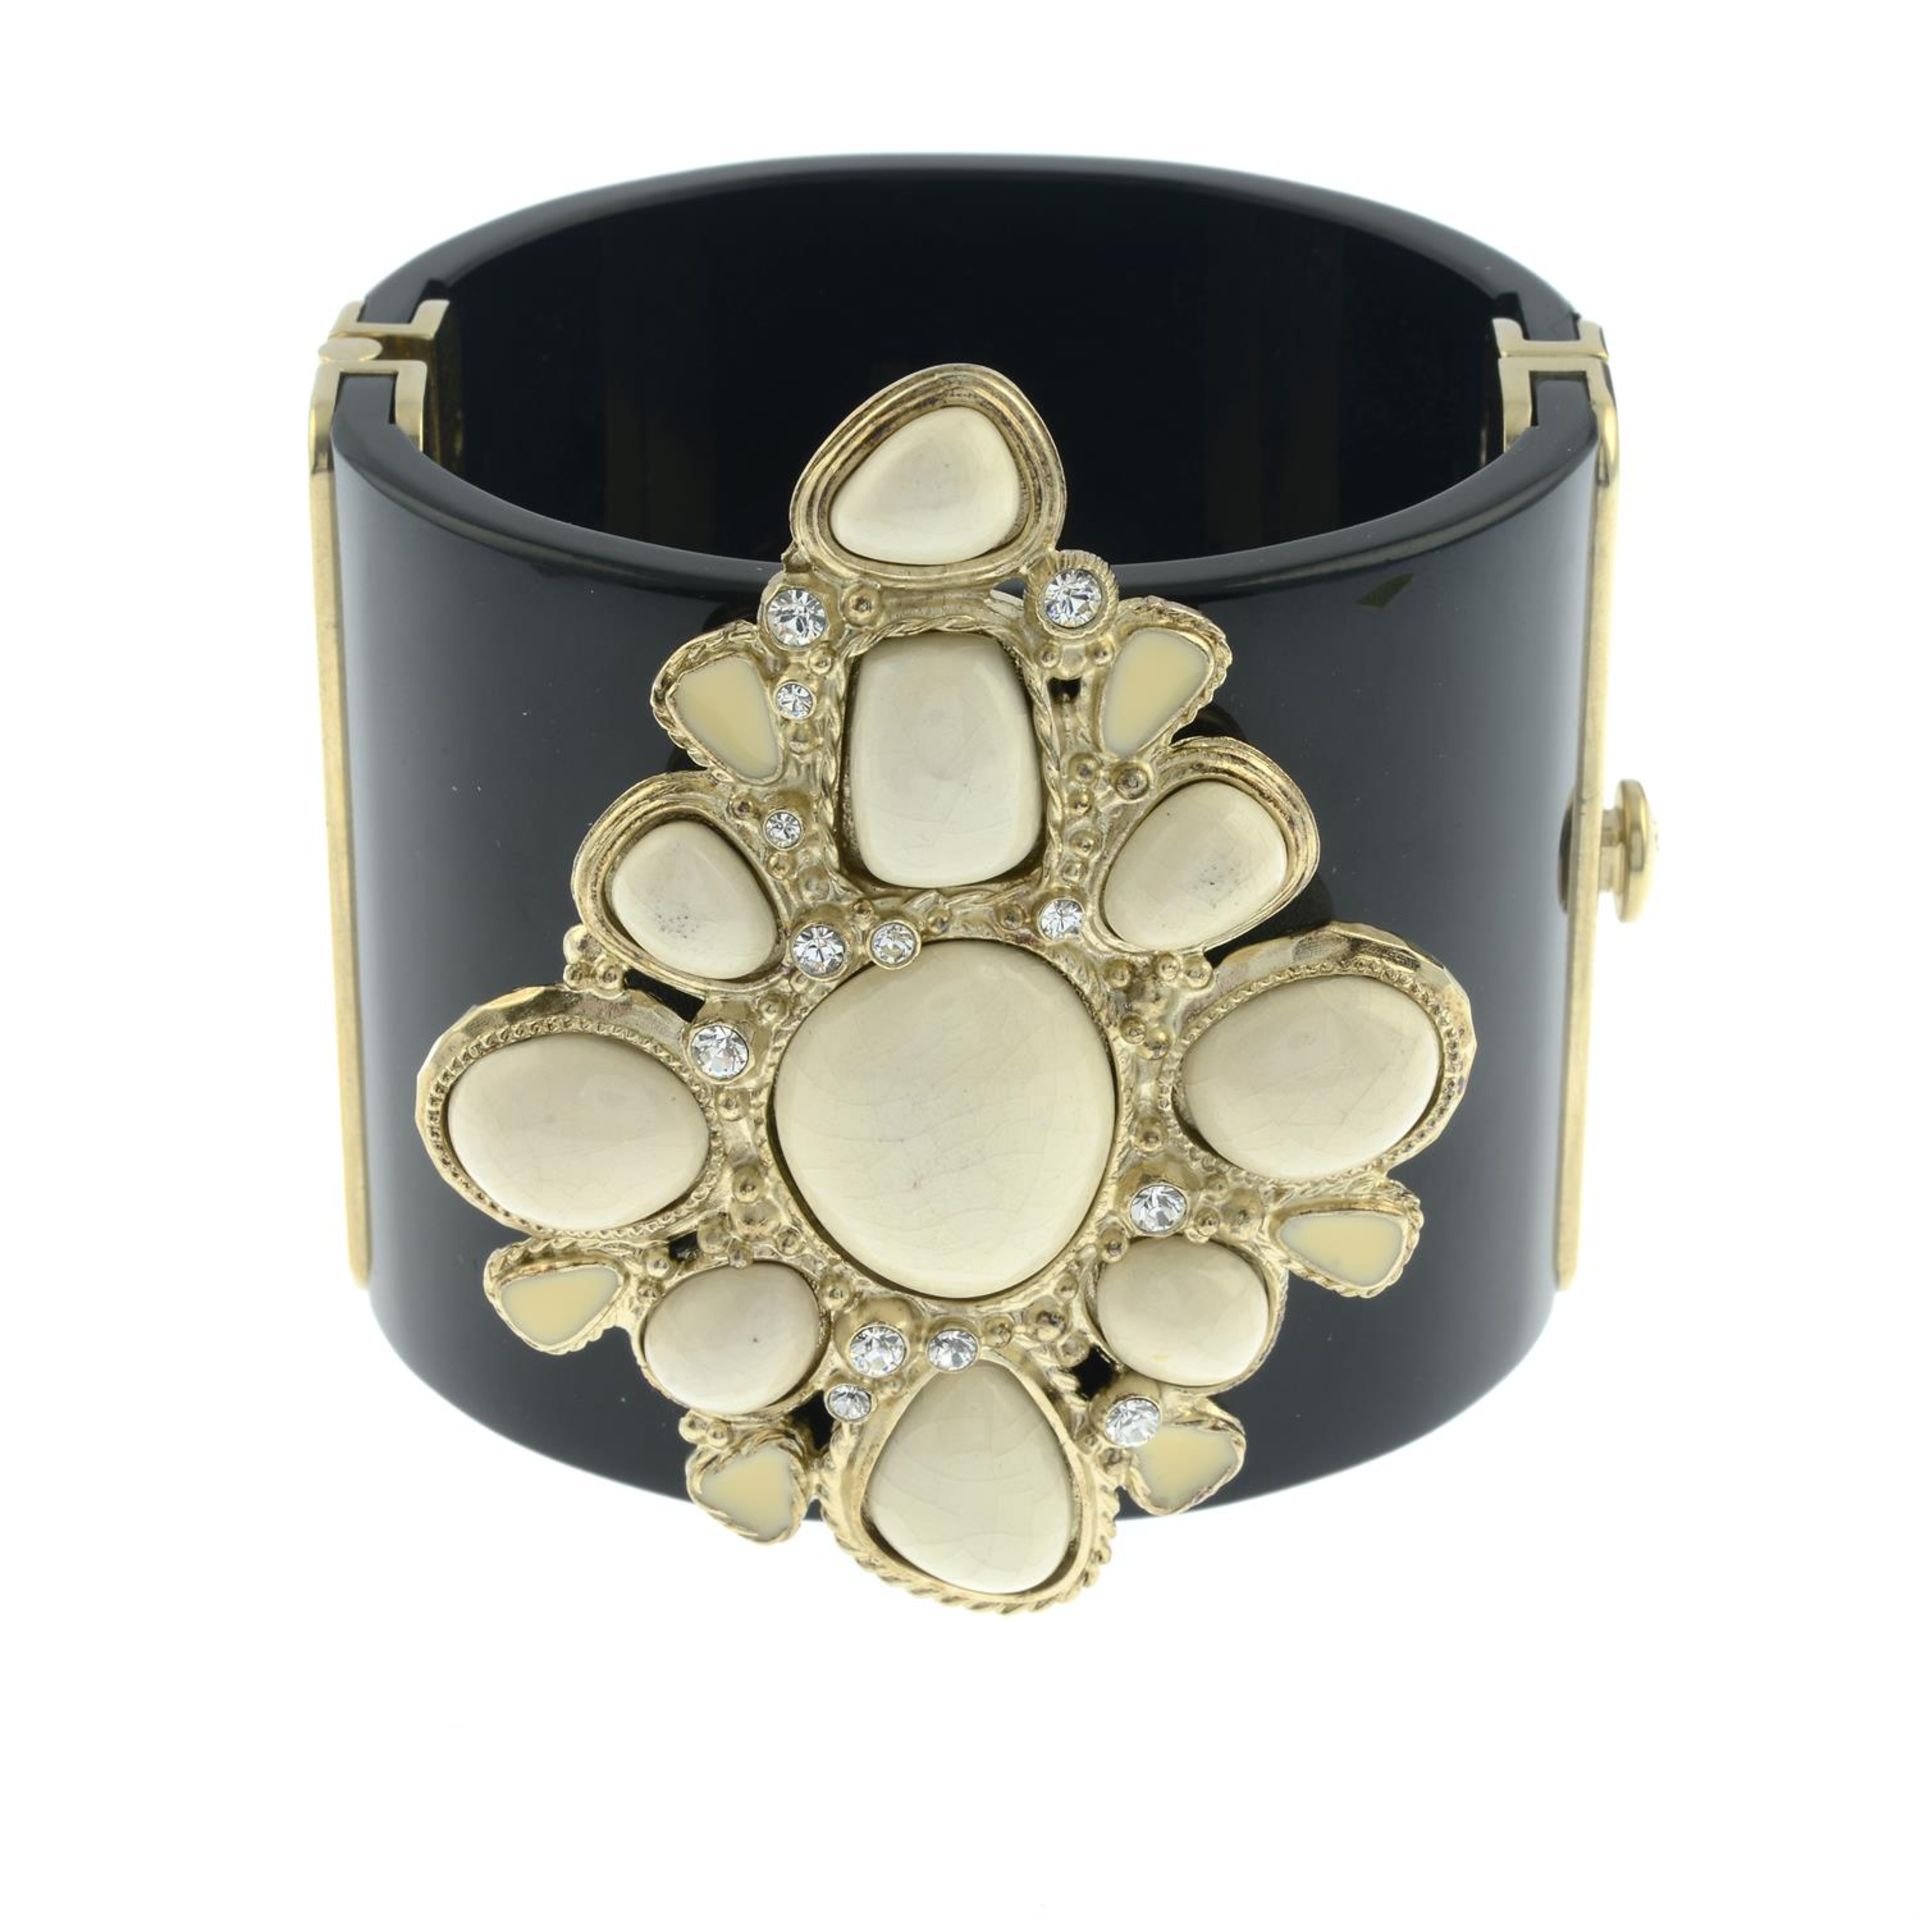 CHANEL - a hinged black cuff with cream enamel and glazed panel.